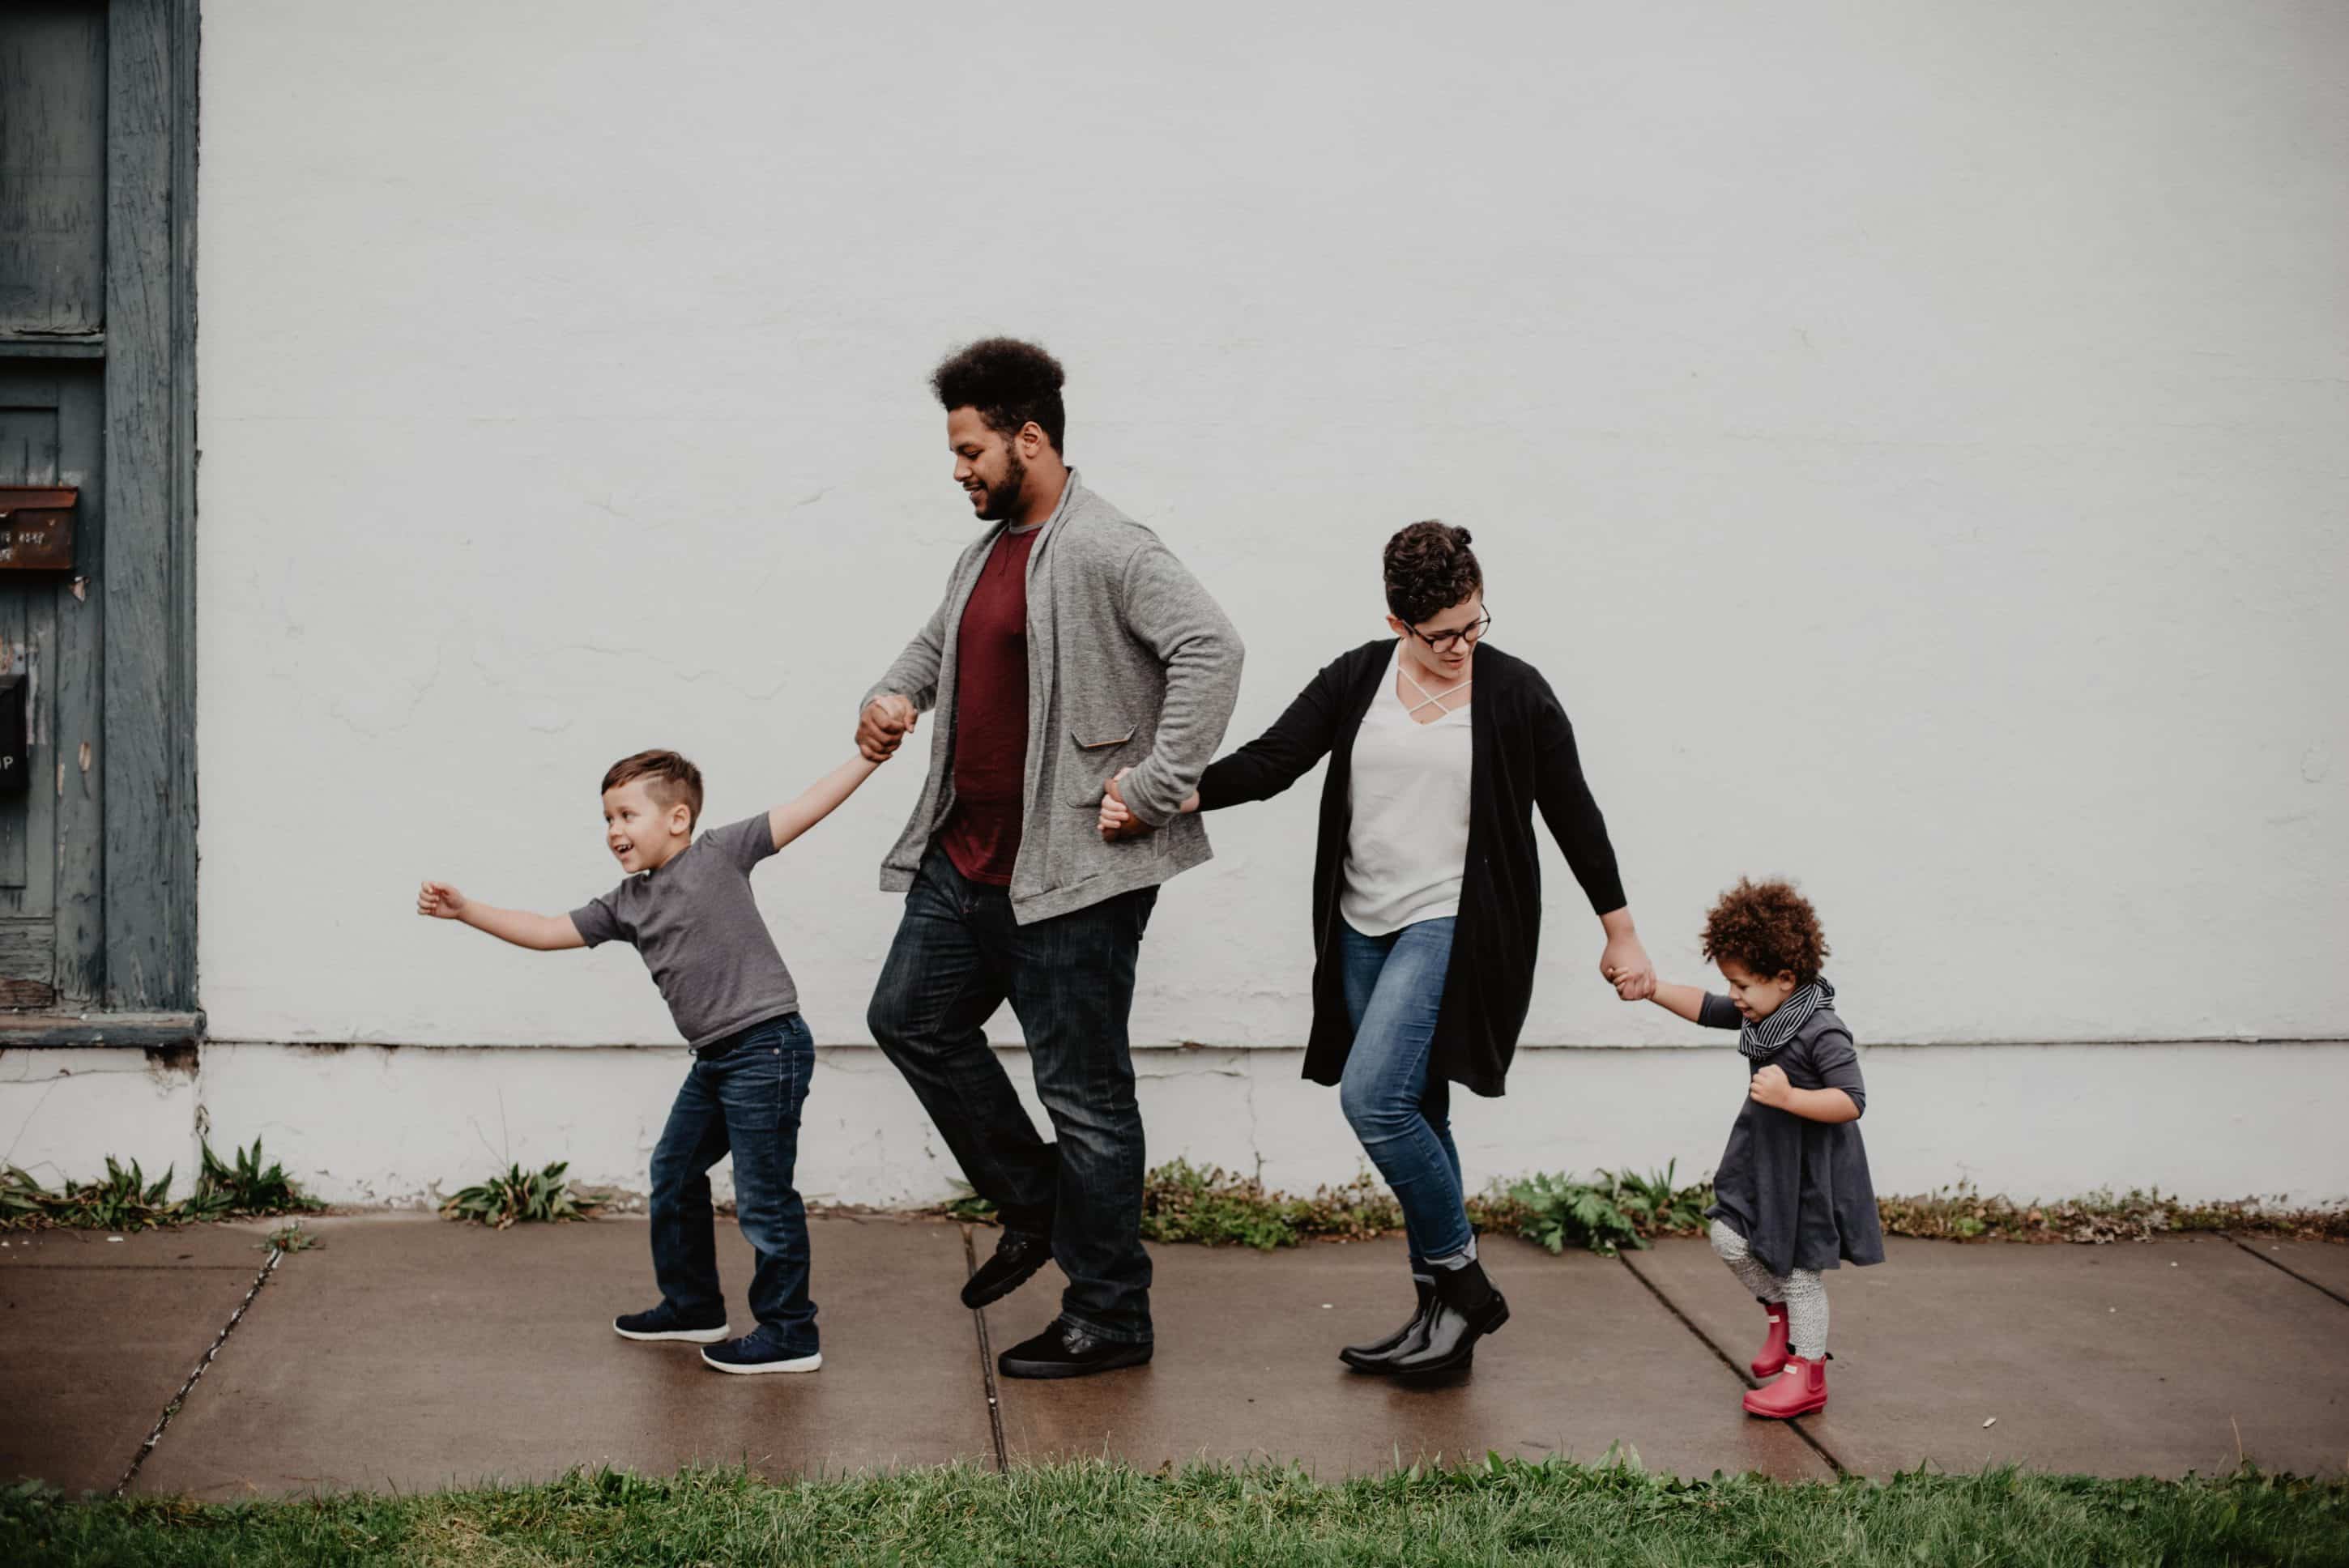 Parents with two kids all holding hands while walking